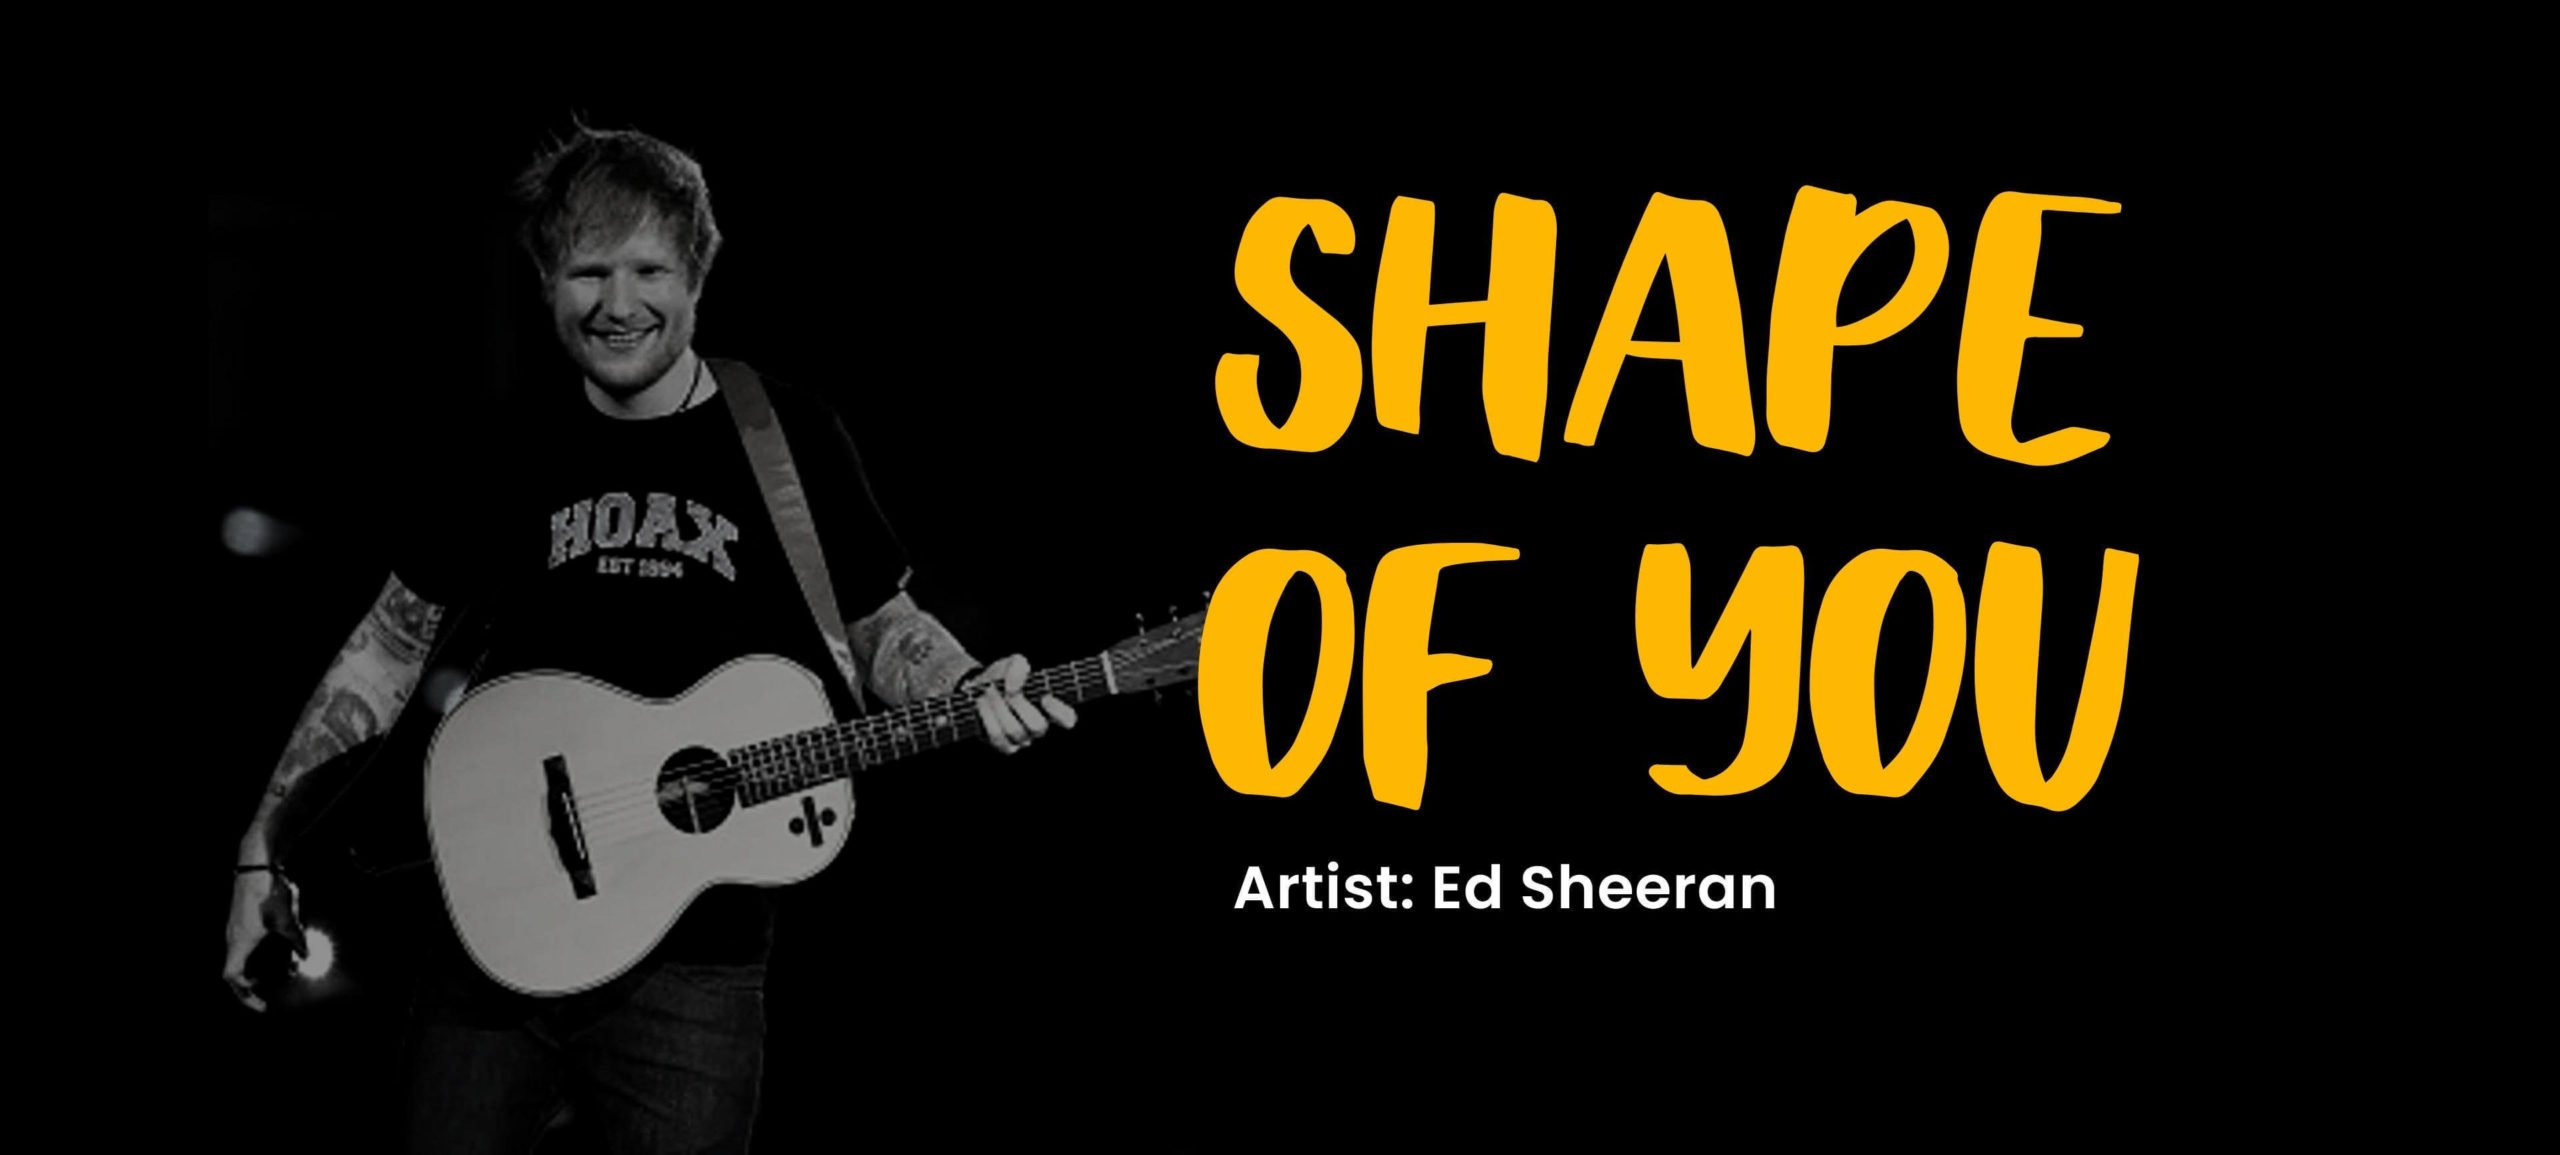 "Shape Of You" streamed songs on spotify 